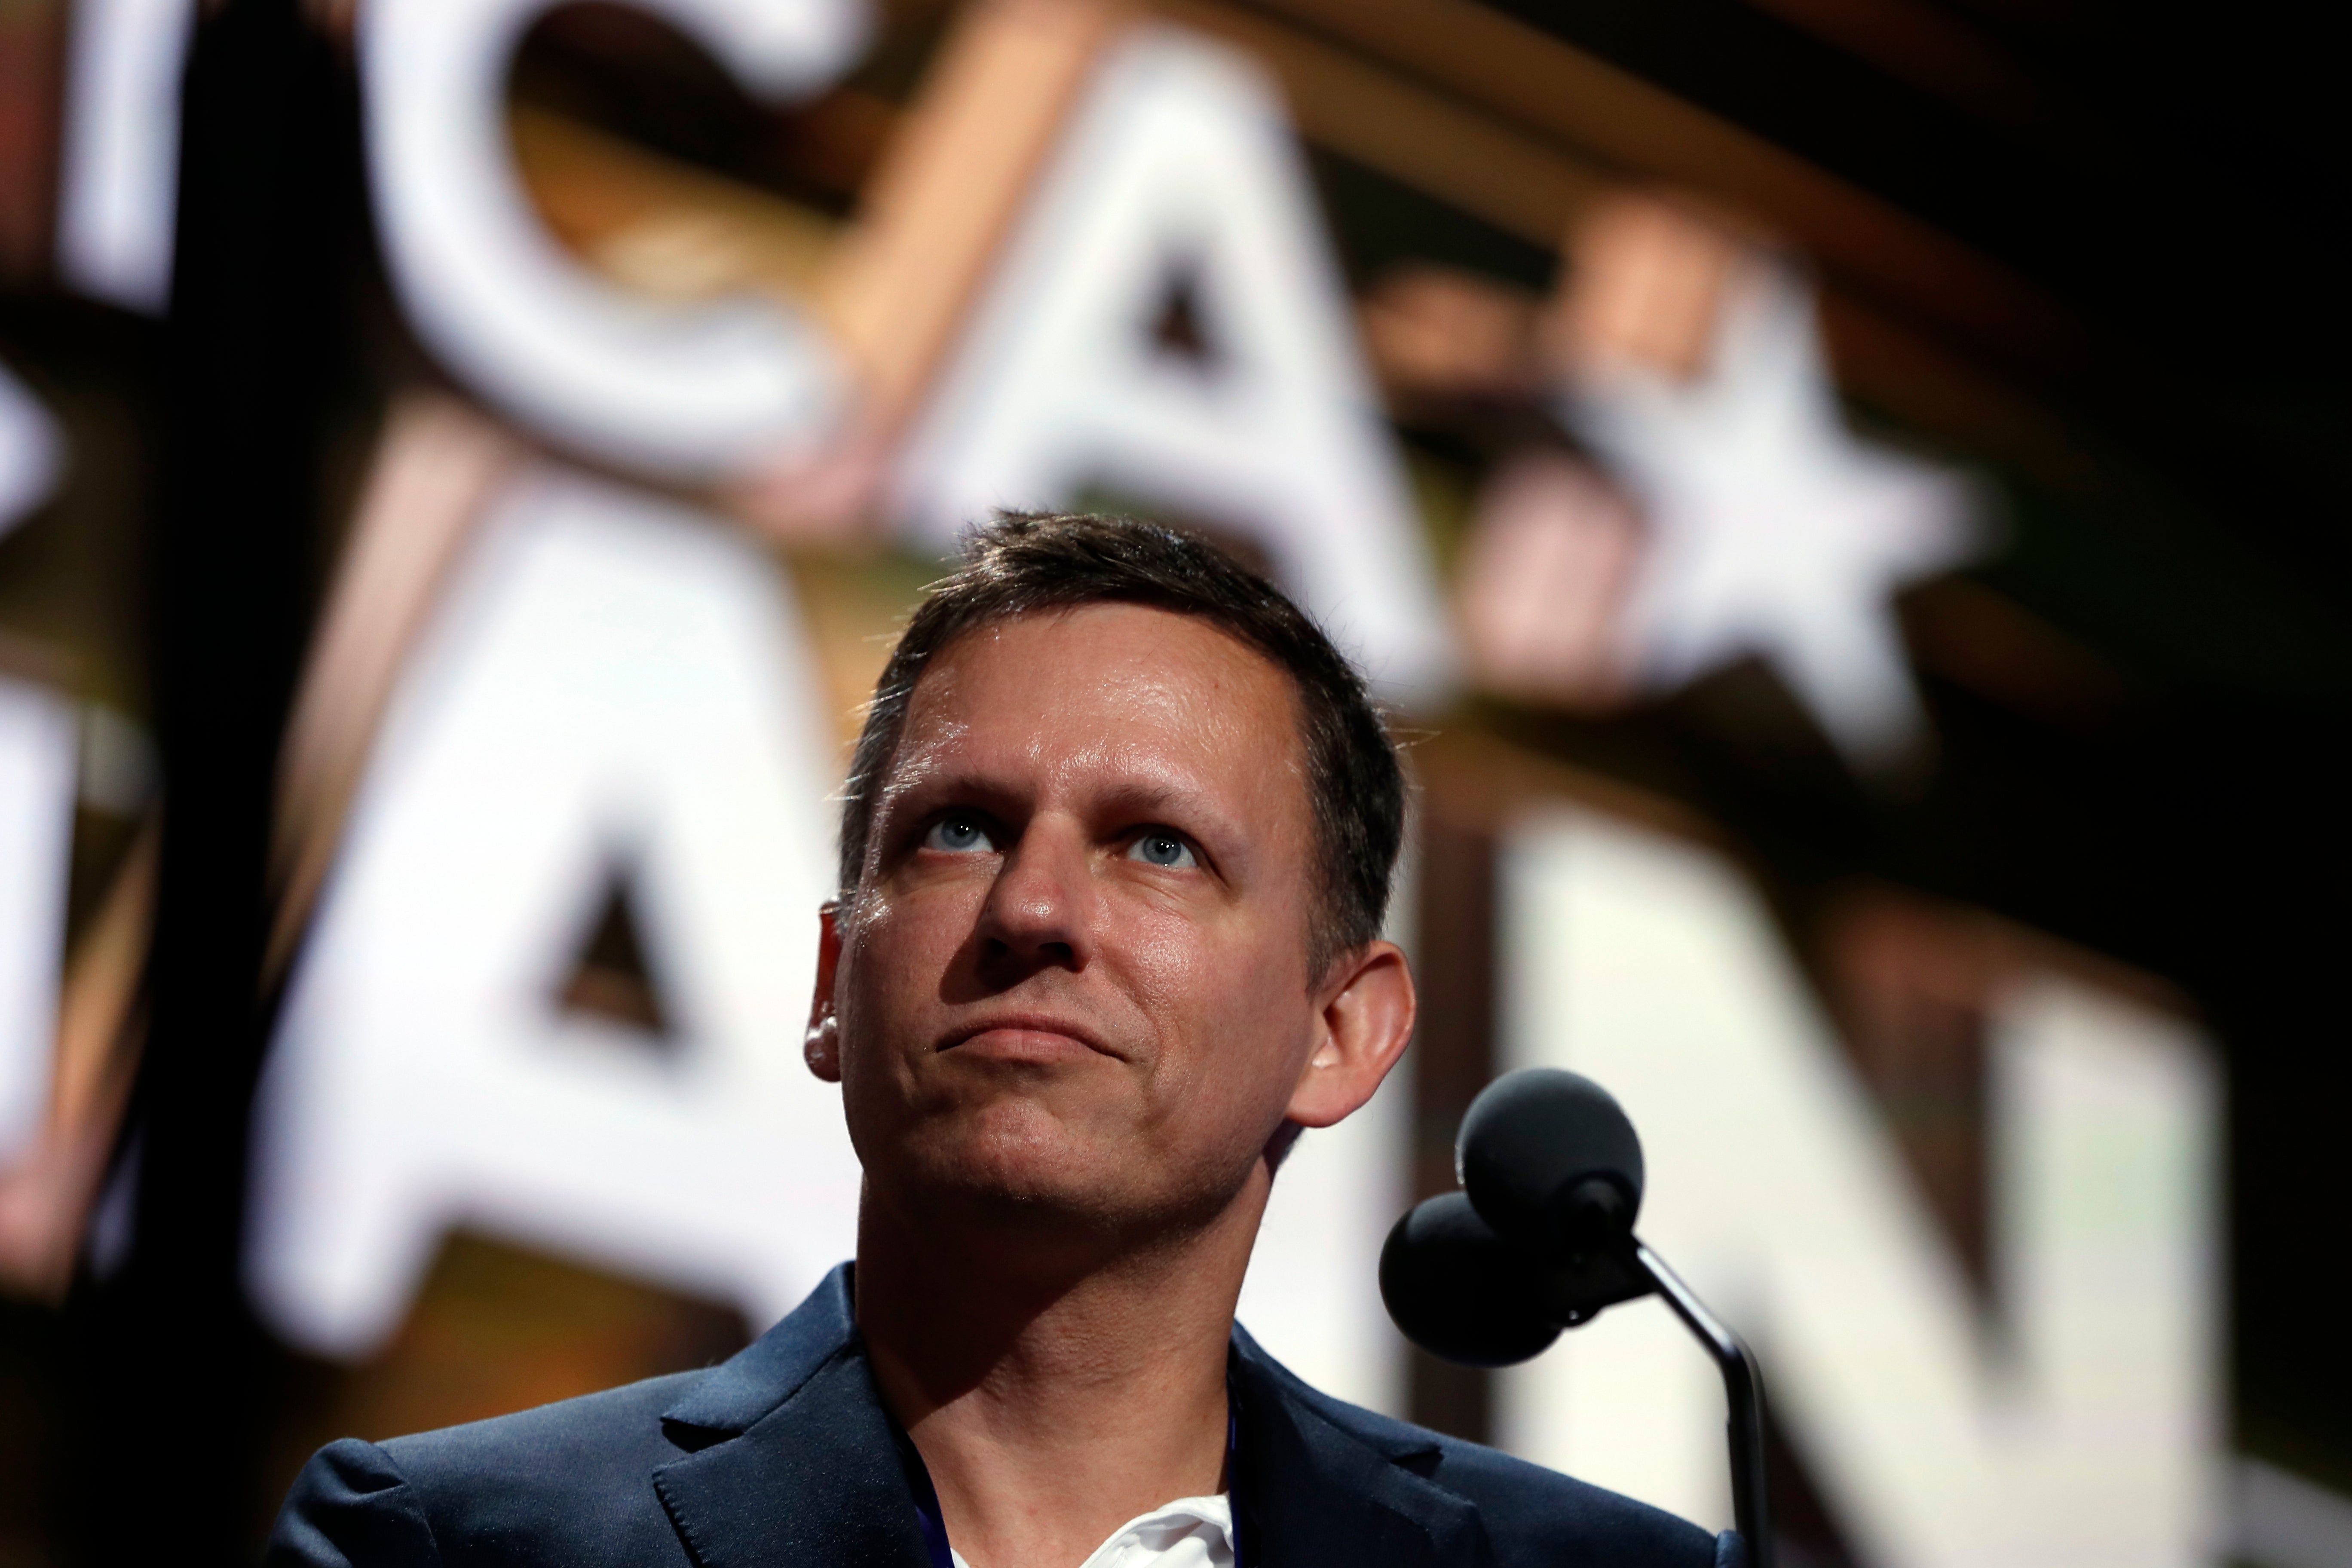 ‘A question still nags at me: were the points Thiel raised completely without merit?’